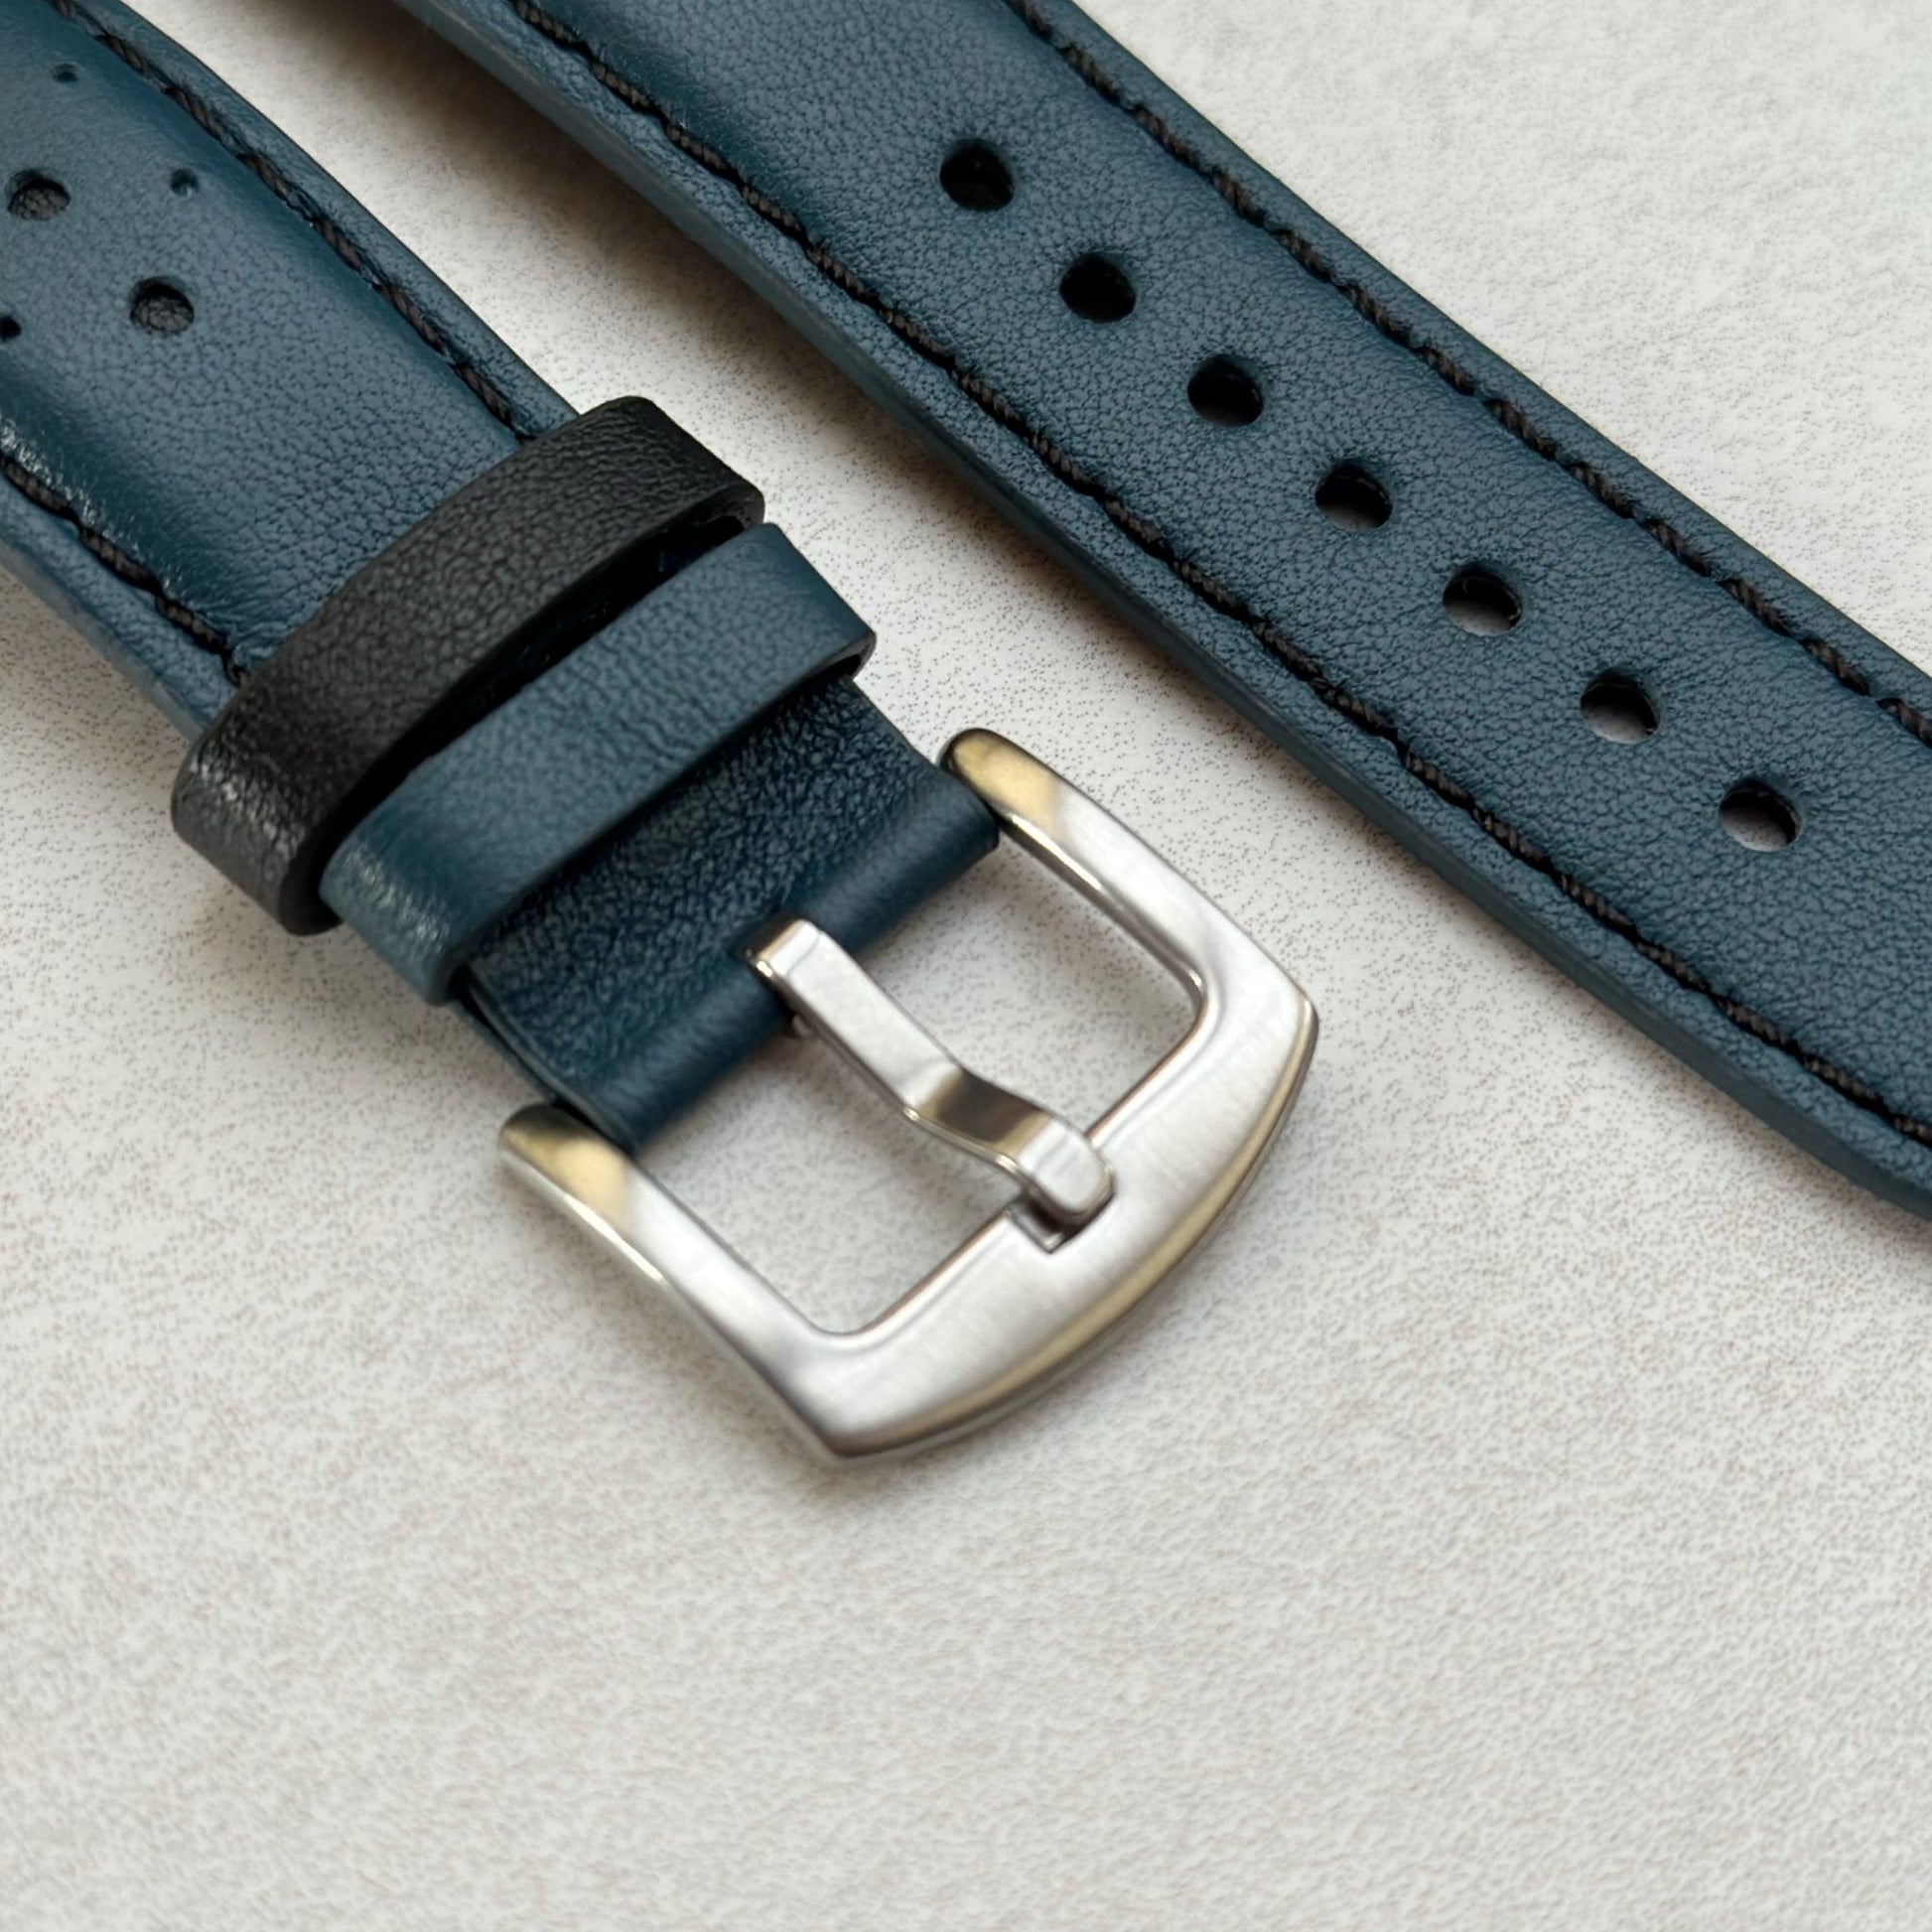 Brushed 316L stainless steel buckle on the Le Mans petrol blue and black leather apple watch strap.